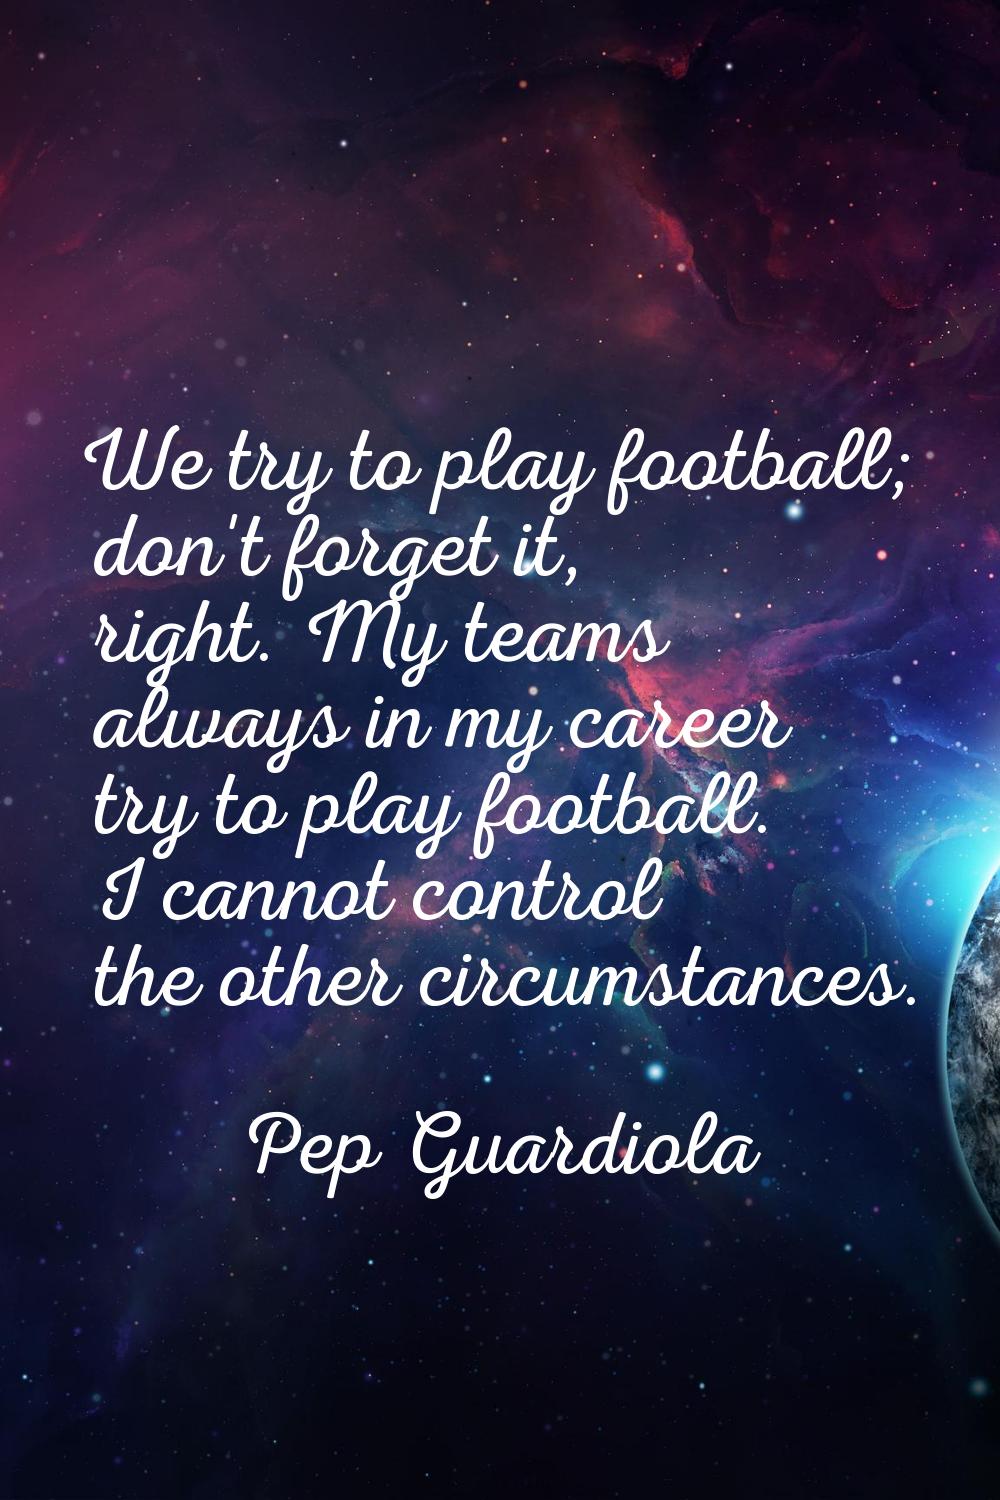 We try to play football; don't forget it, right. My teams always in my career try to play football.